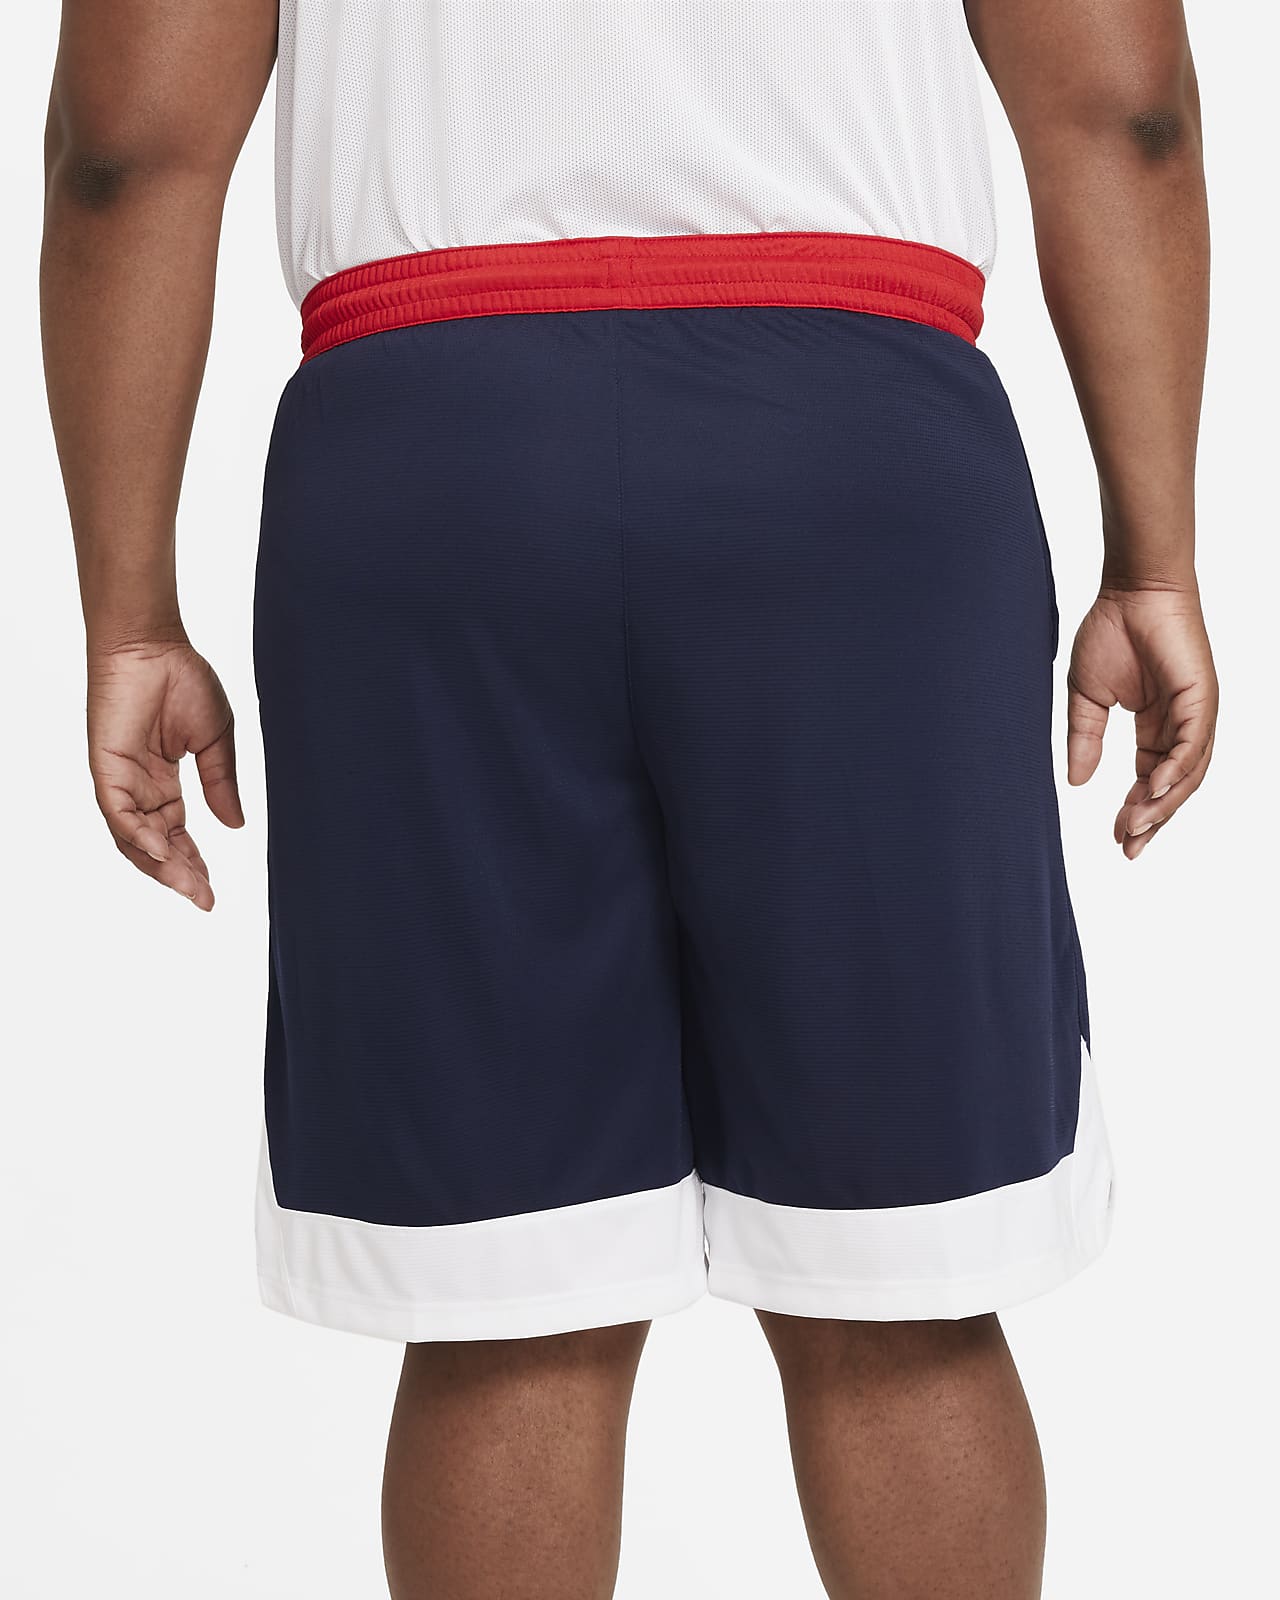 nike shorts red white and blue